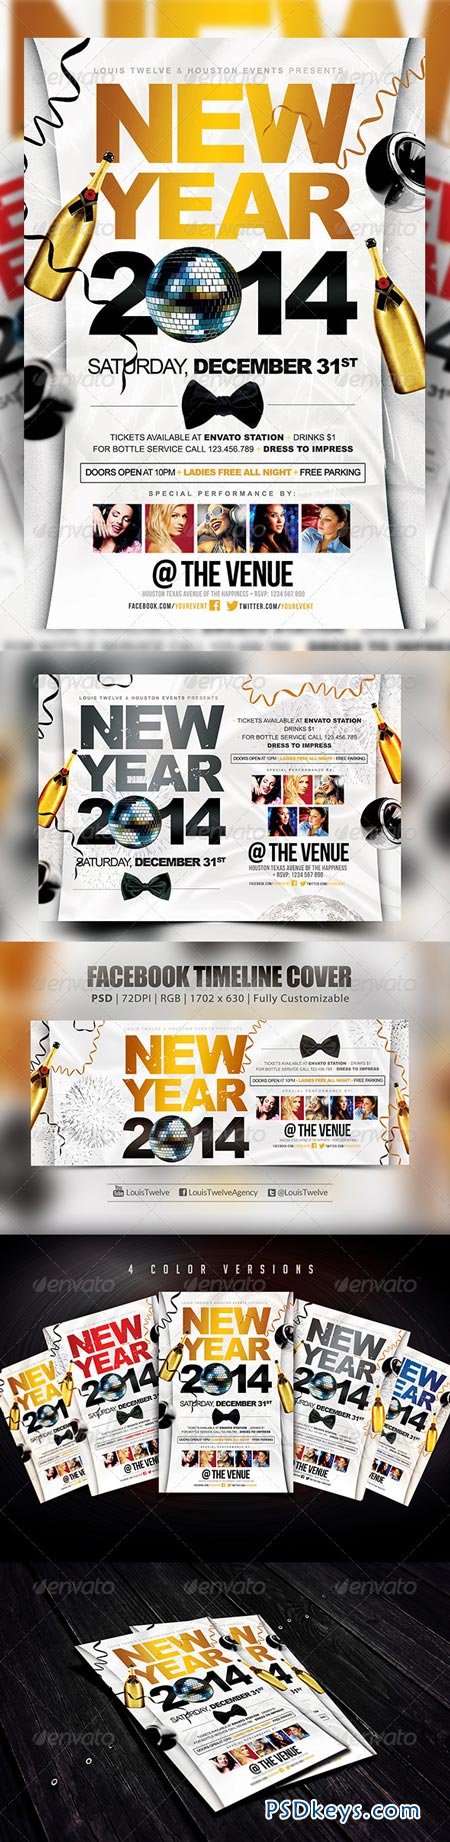 New Year Party  Flyers + FB Cover 5966769